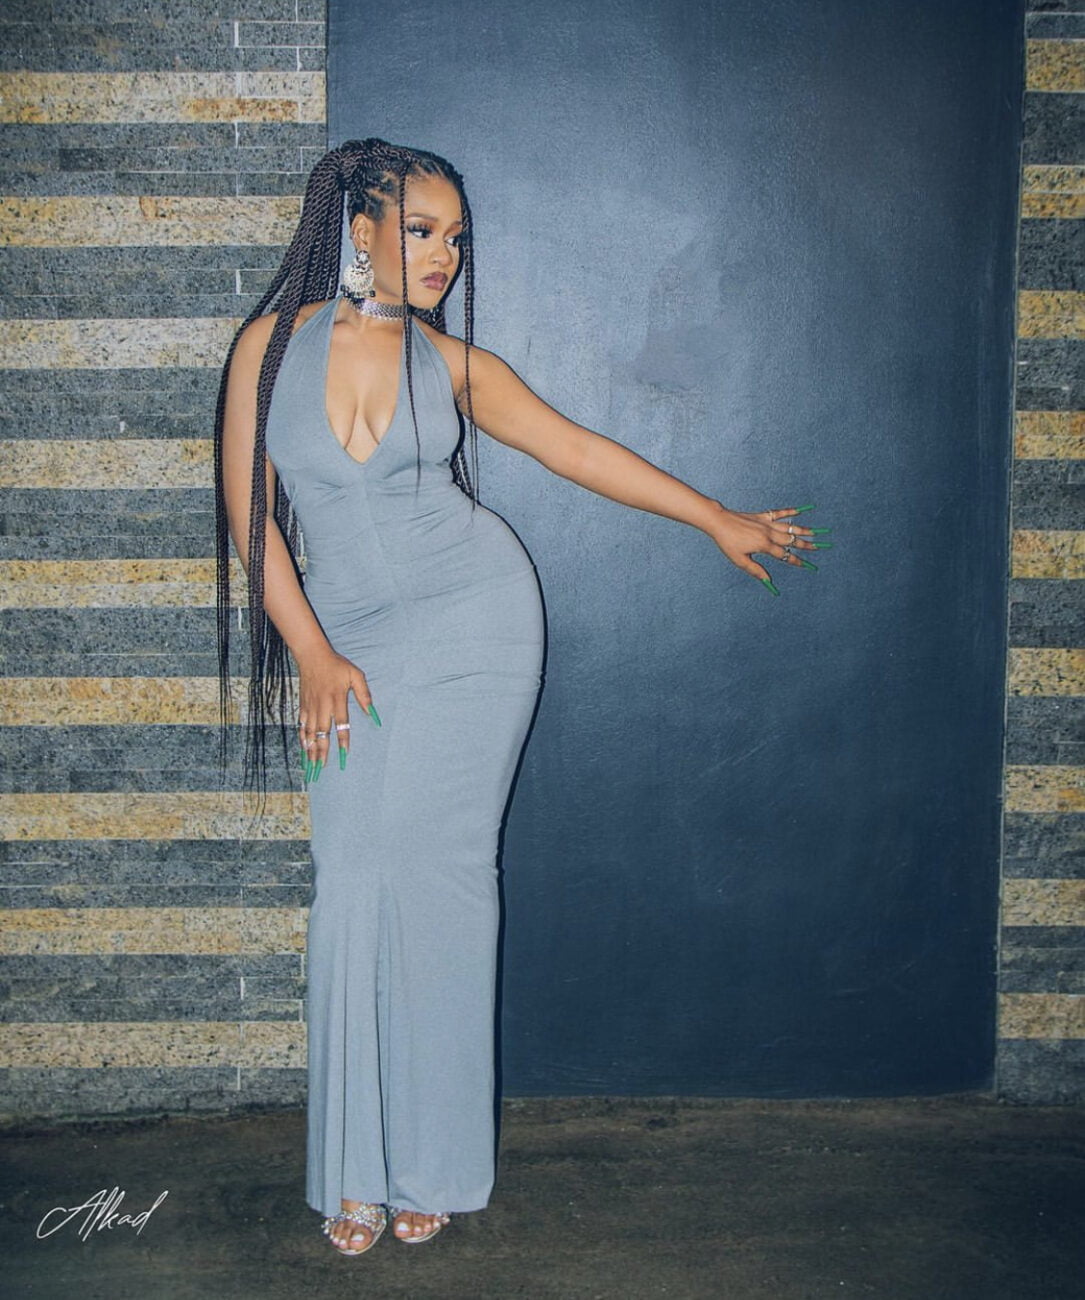 Phyna in a grey colored body con dress.